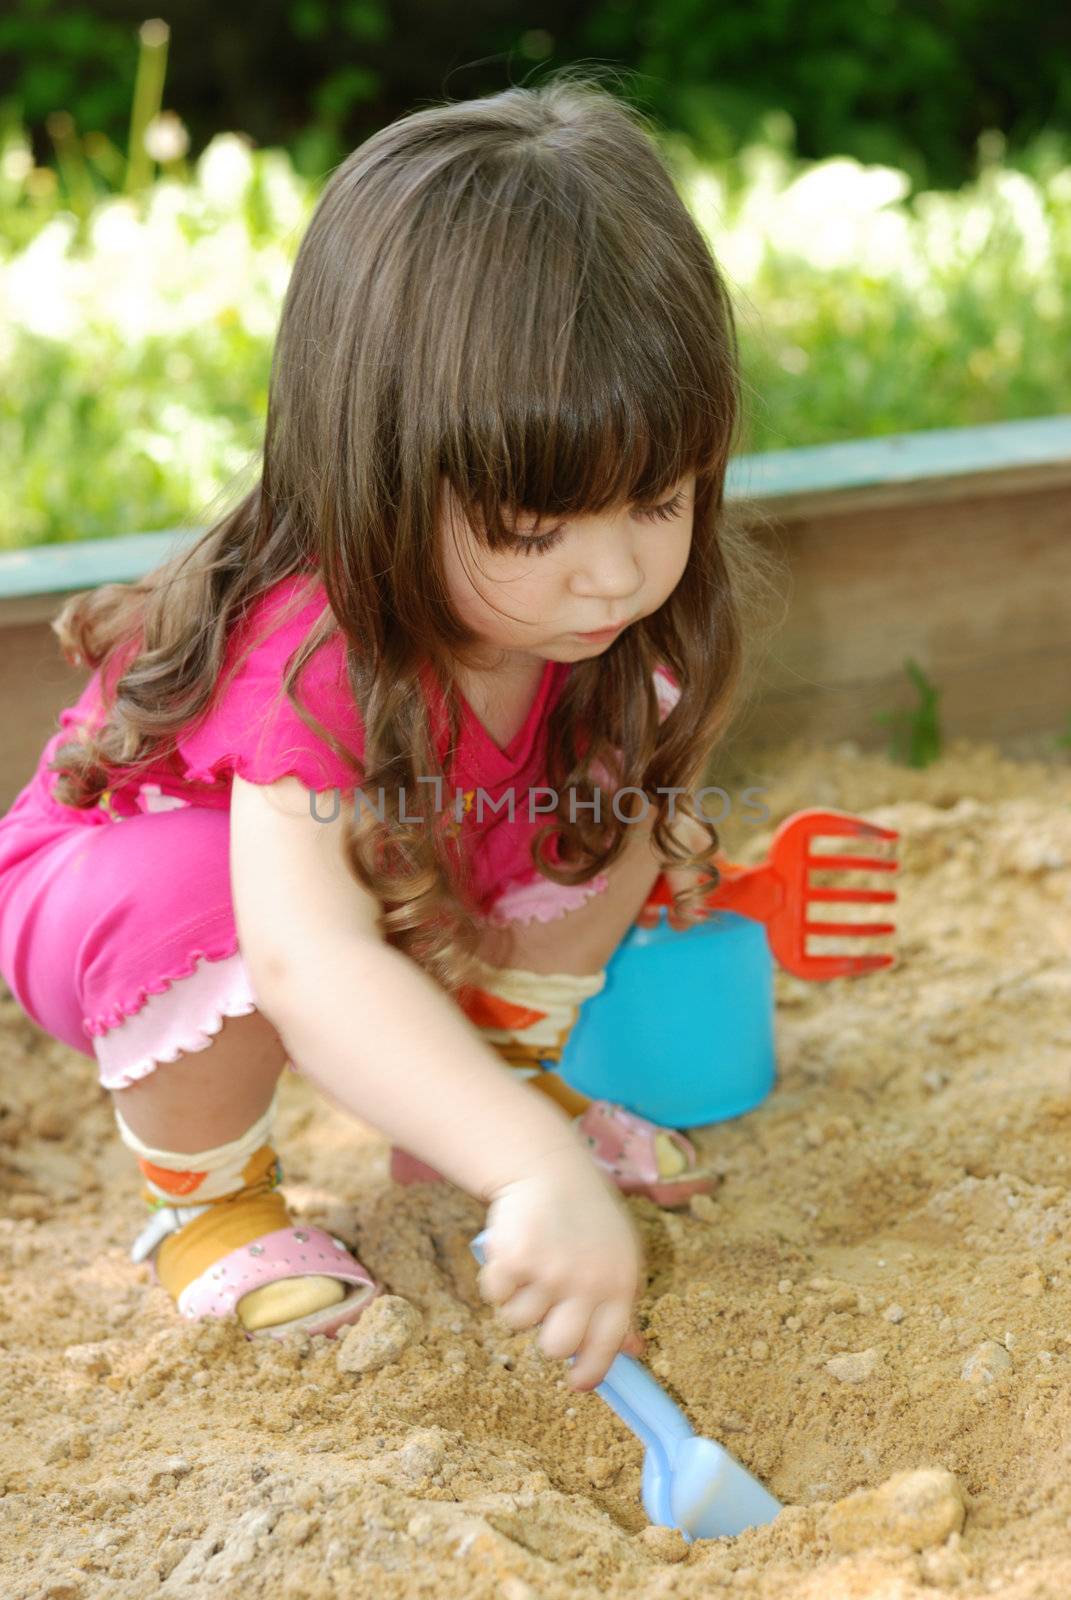 The girl playing to a sandbox by galdzer